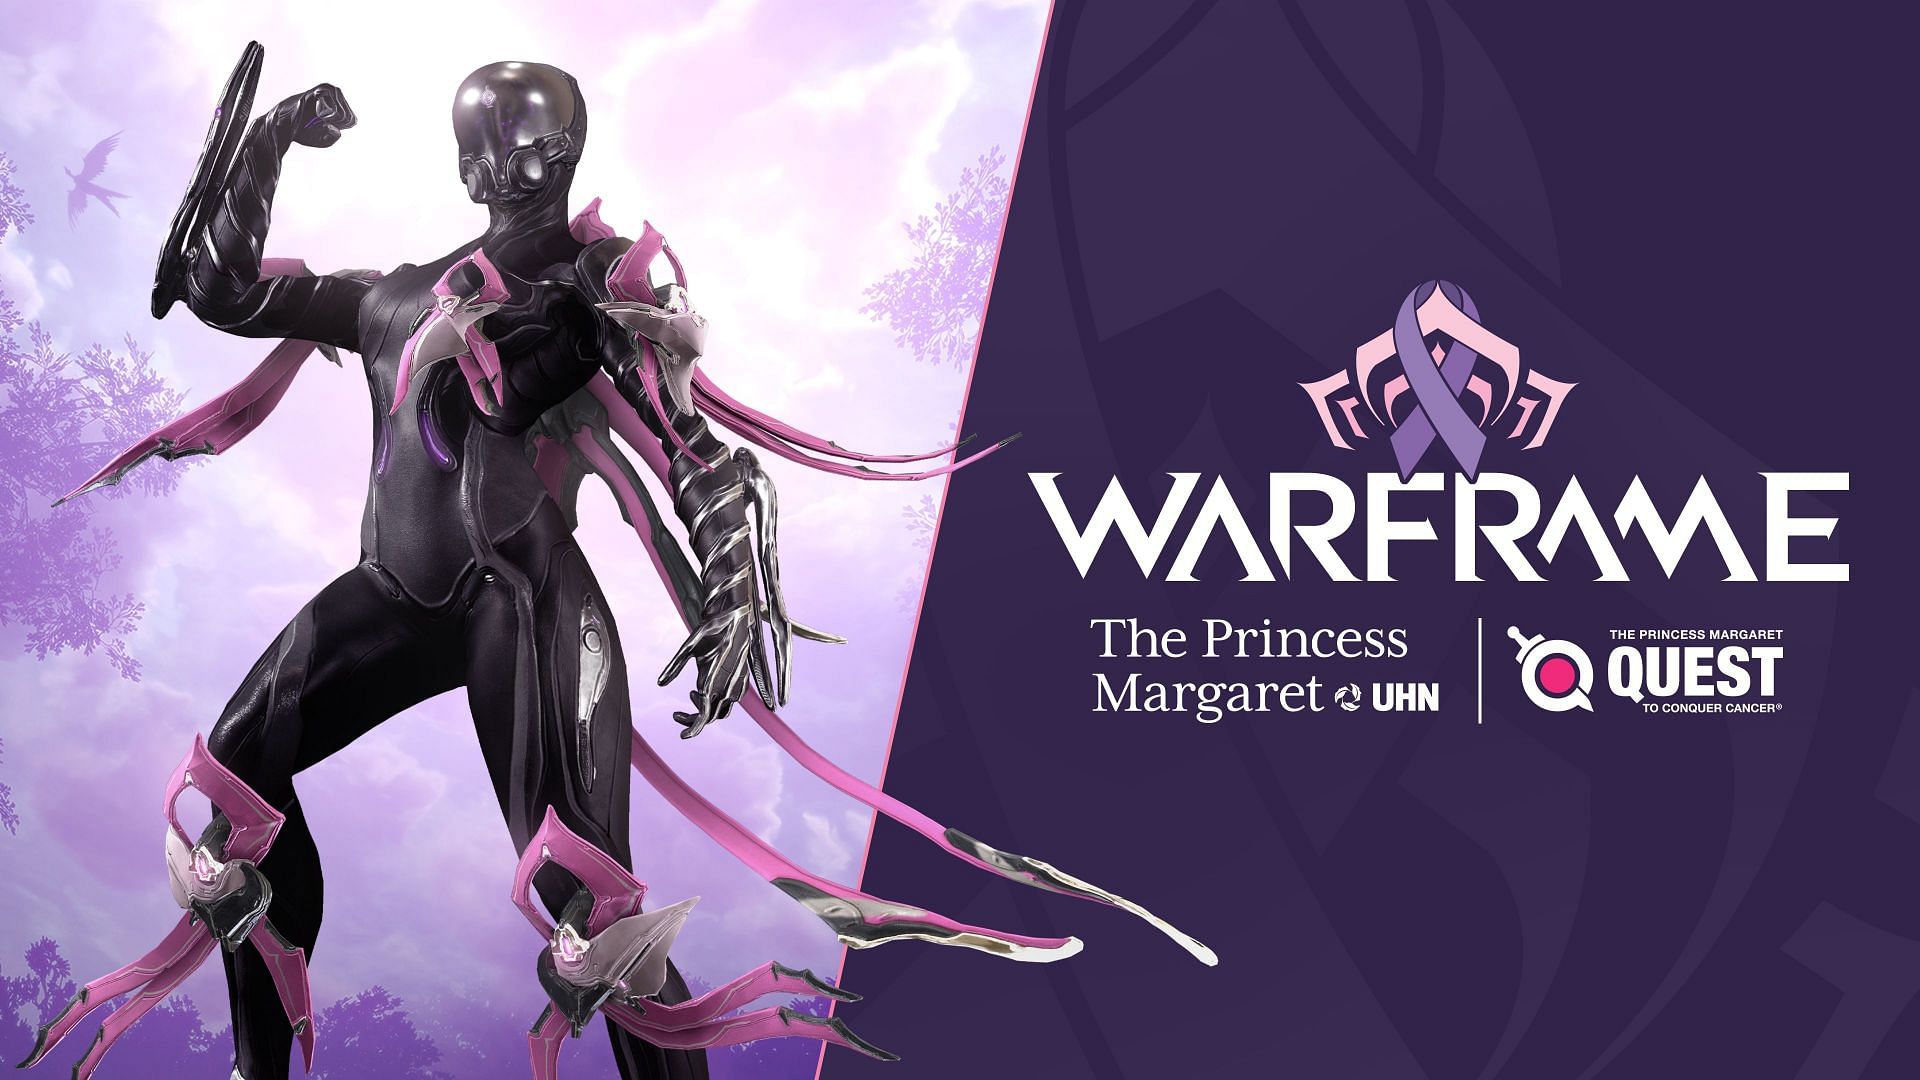 The Warframe Mag adorned in the Conquera armor, Logos of Warframe, Princess Margaret Foundation, Quest to Conquer Cancer